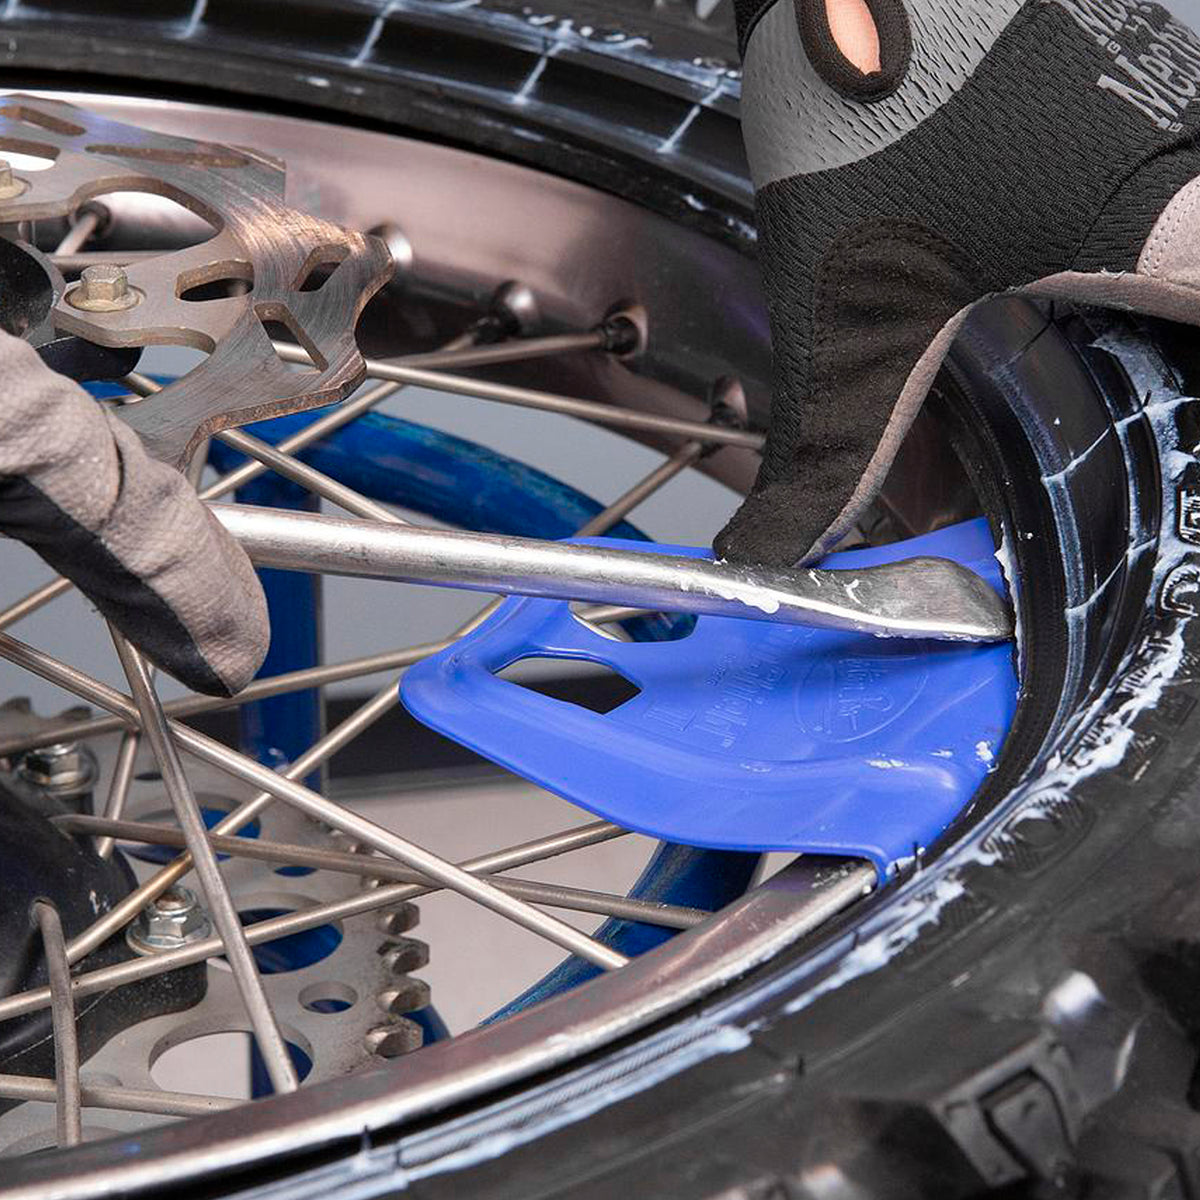 A set of Motion Pro RimShields is highly recommended to avoid dinging and scratching your black motorcycle rims. Motion Pro makes the best motorcycle maintenance tools. Motorcycle tire and wheel maintenance. Motorcycle tire change. Rim shield motorcycle wheel protectors.